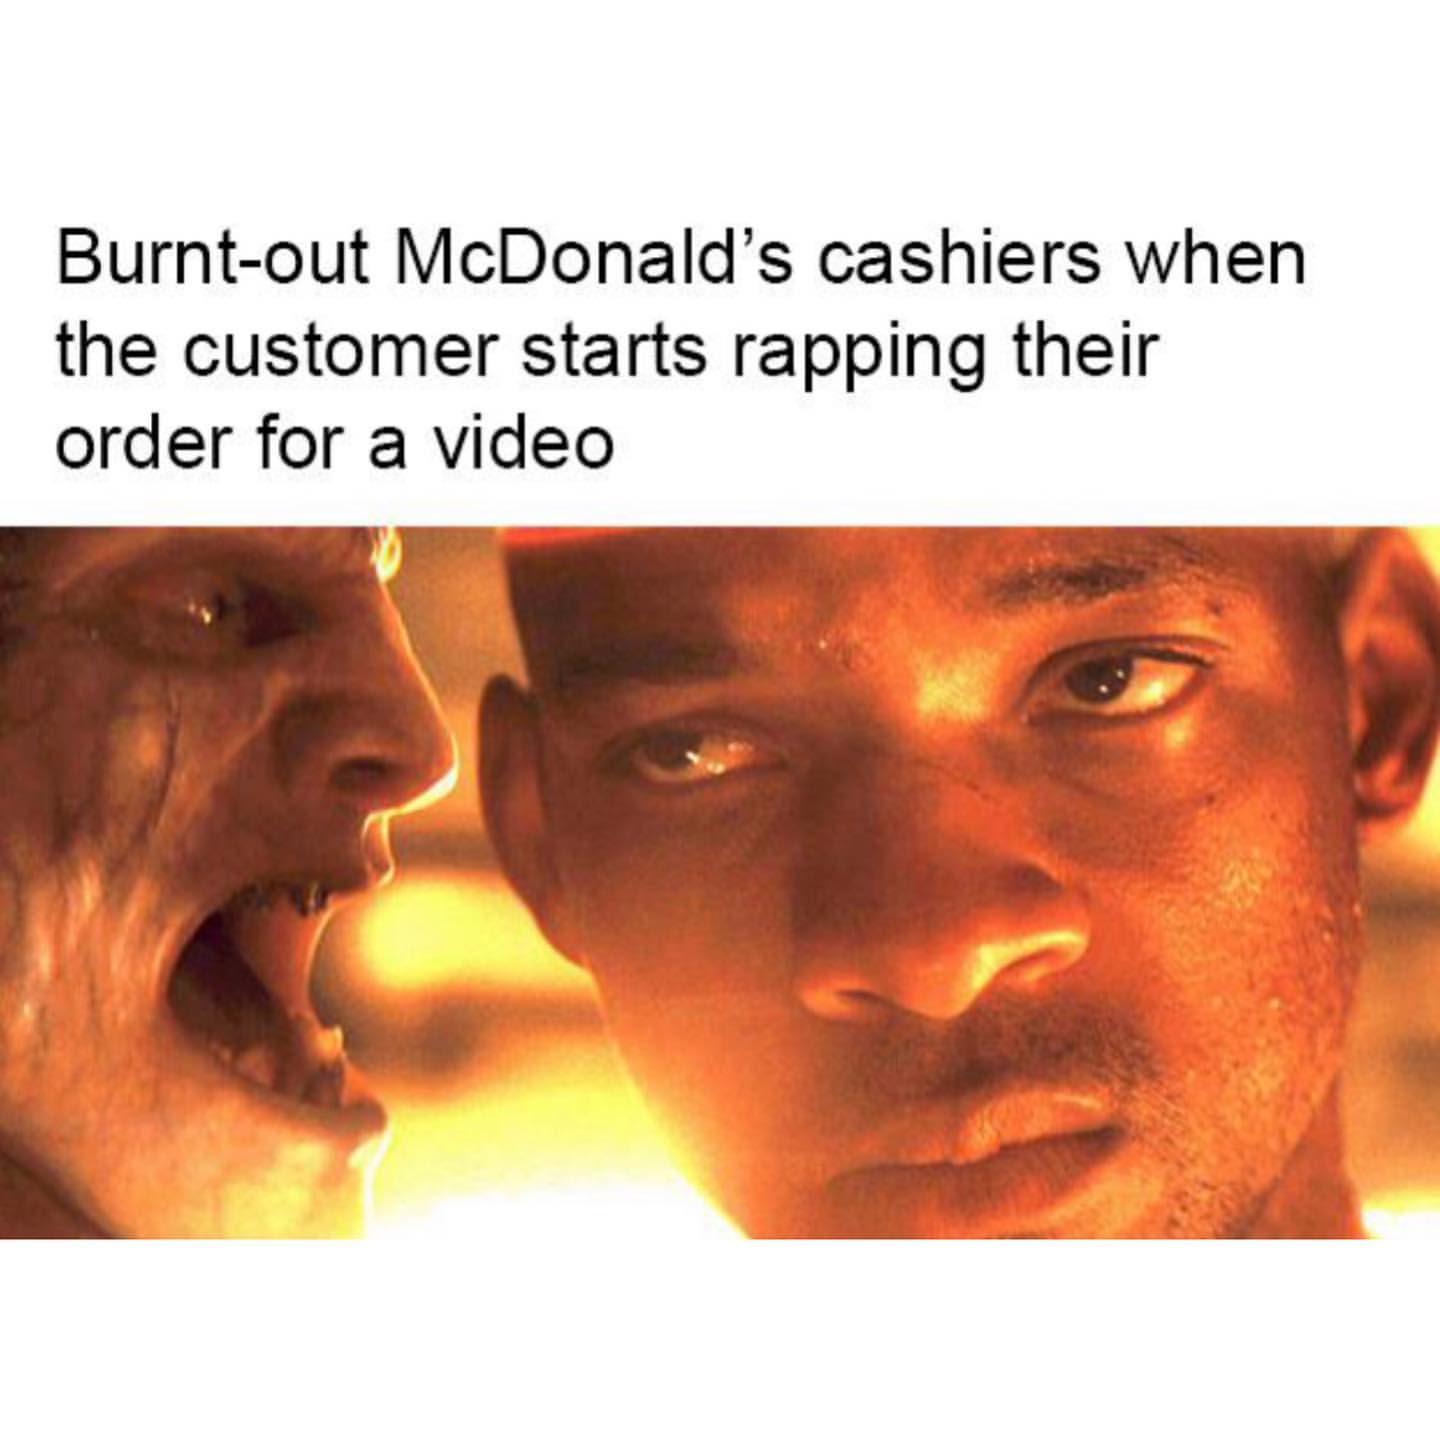 Burnt-out McDonald's cashiers when the customer starts rapping their order for a video.